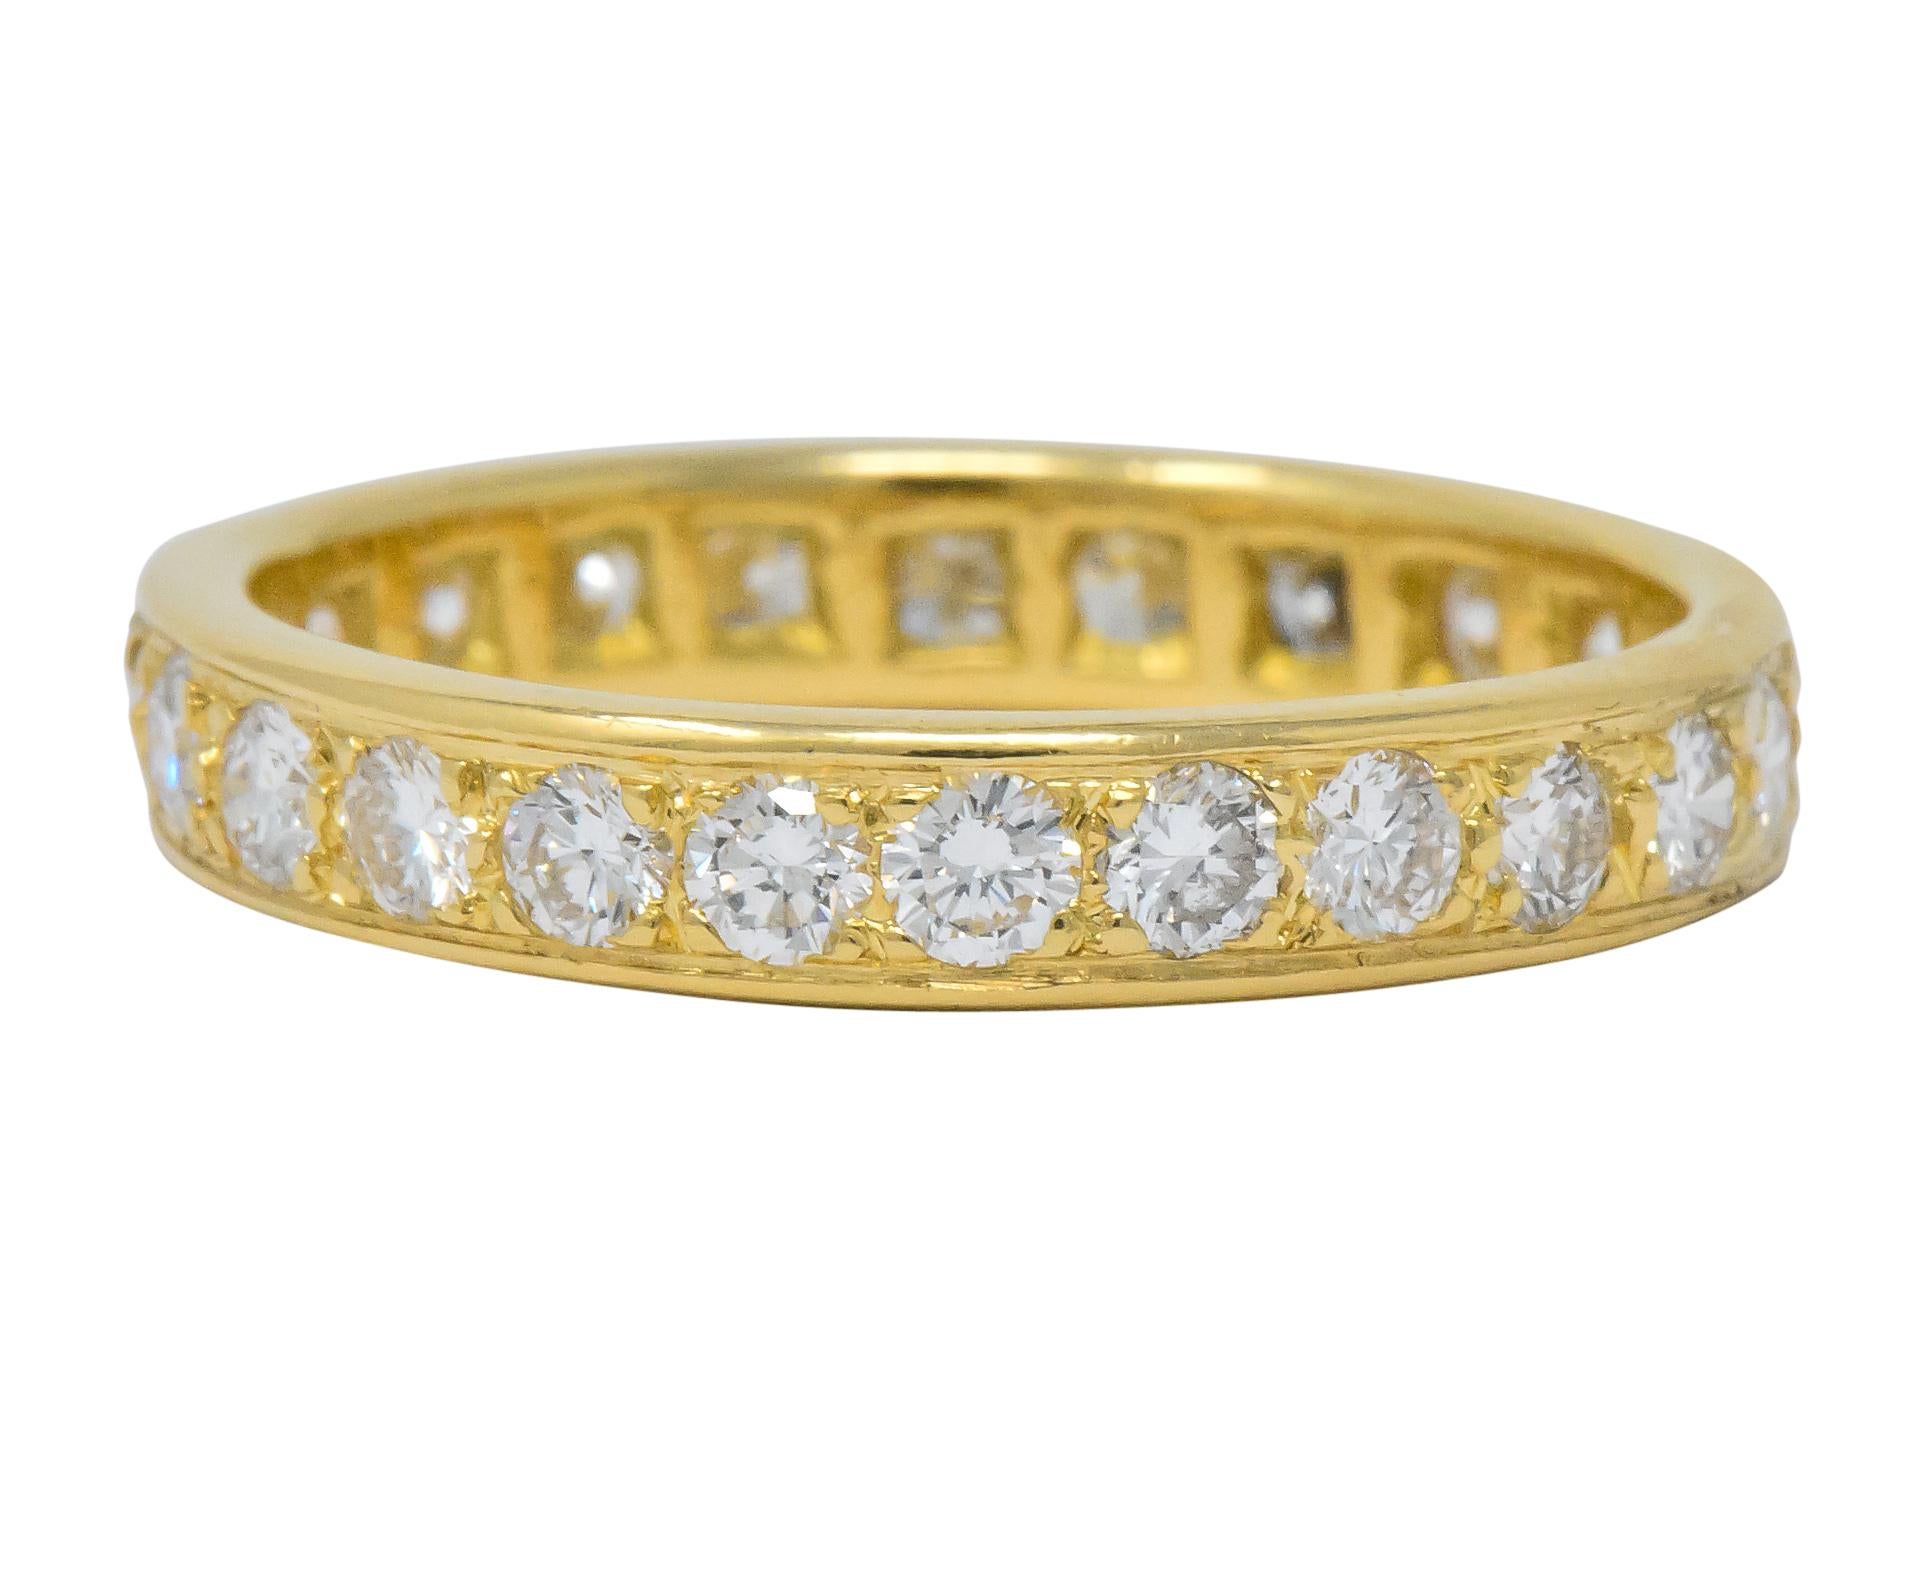 Round brilliant cut diamonds weighing approximately 1.38 carats total, G/H color and VVS to VS clarity

Completely bead set surface with high polished edging

Tested as 18 karat gold

Ring Size: 8 3/4 & Not Sizable

Top measures: 3.8 mm and sits 1.9